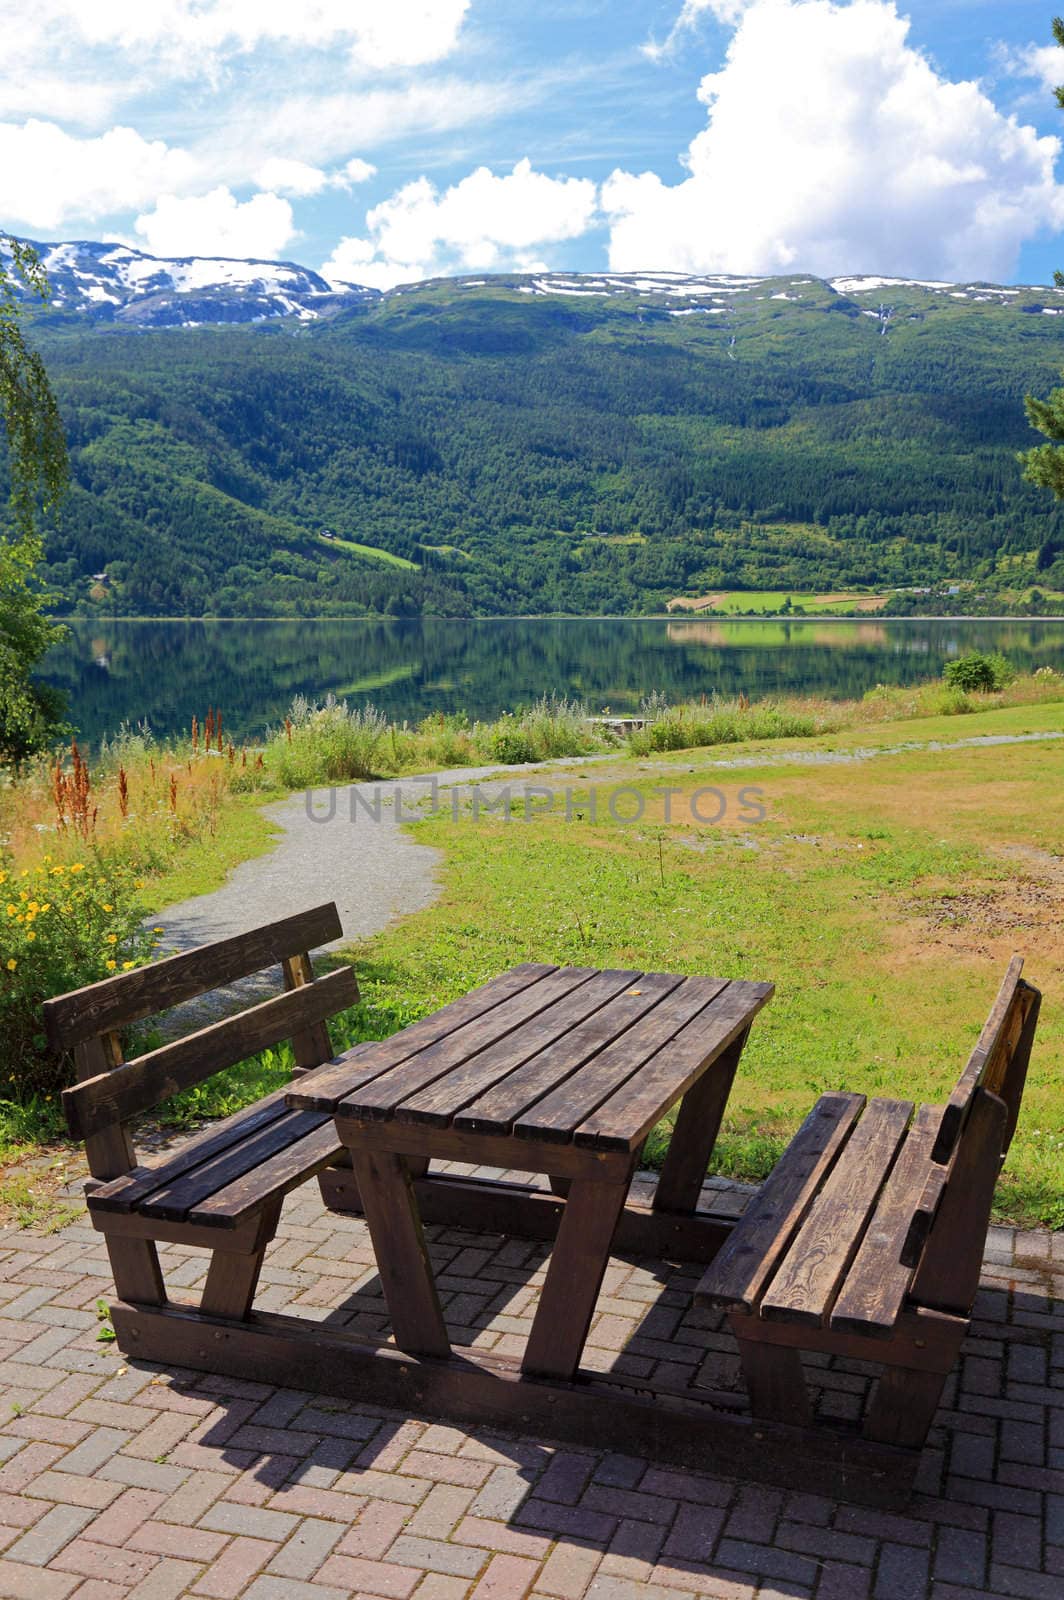 Picnic table and benches near lake in Norway, Europe. by borodaev